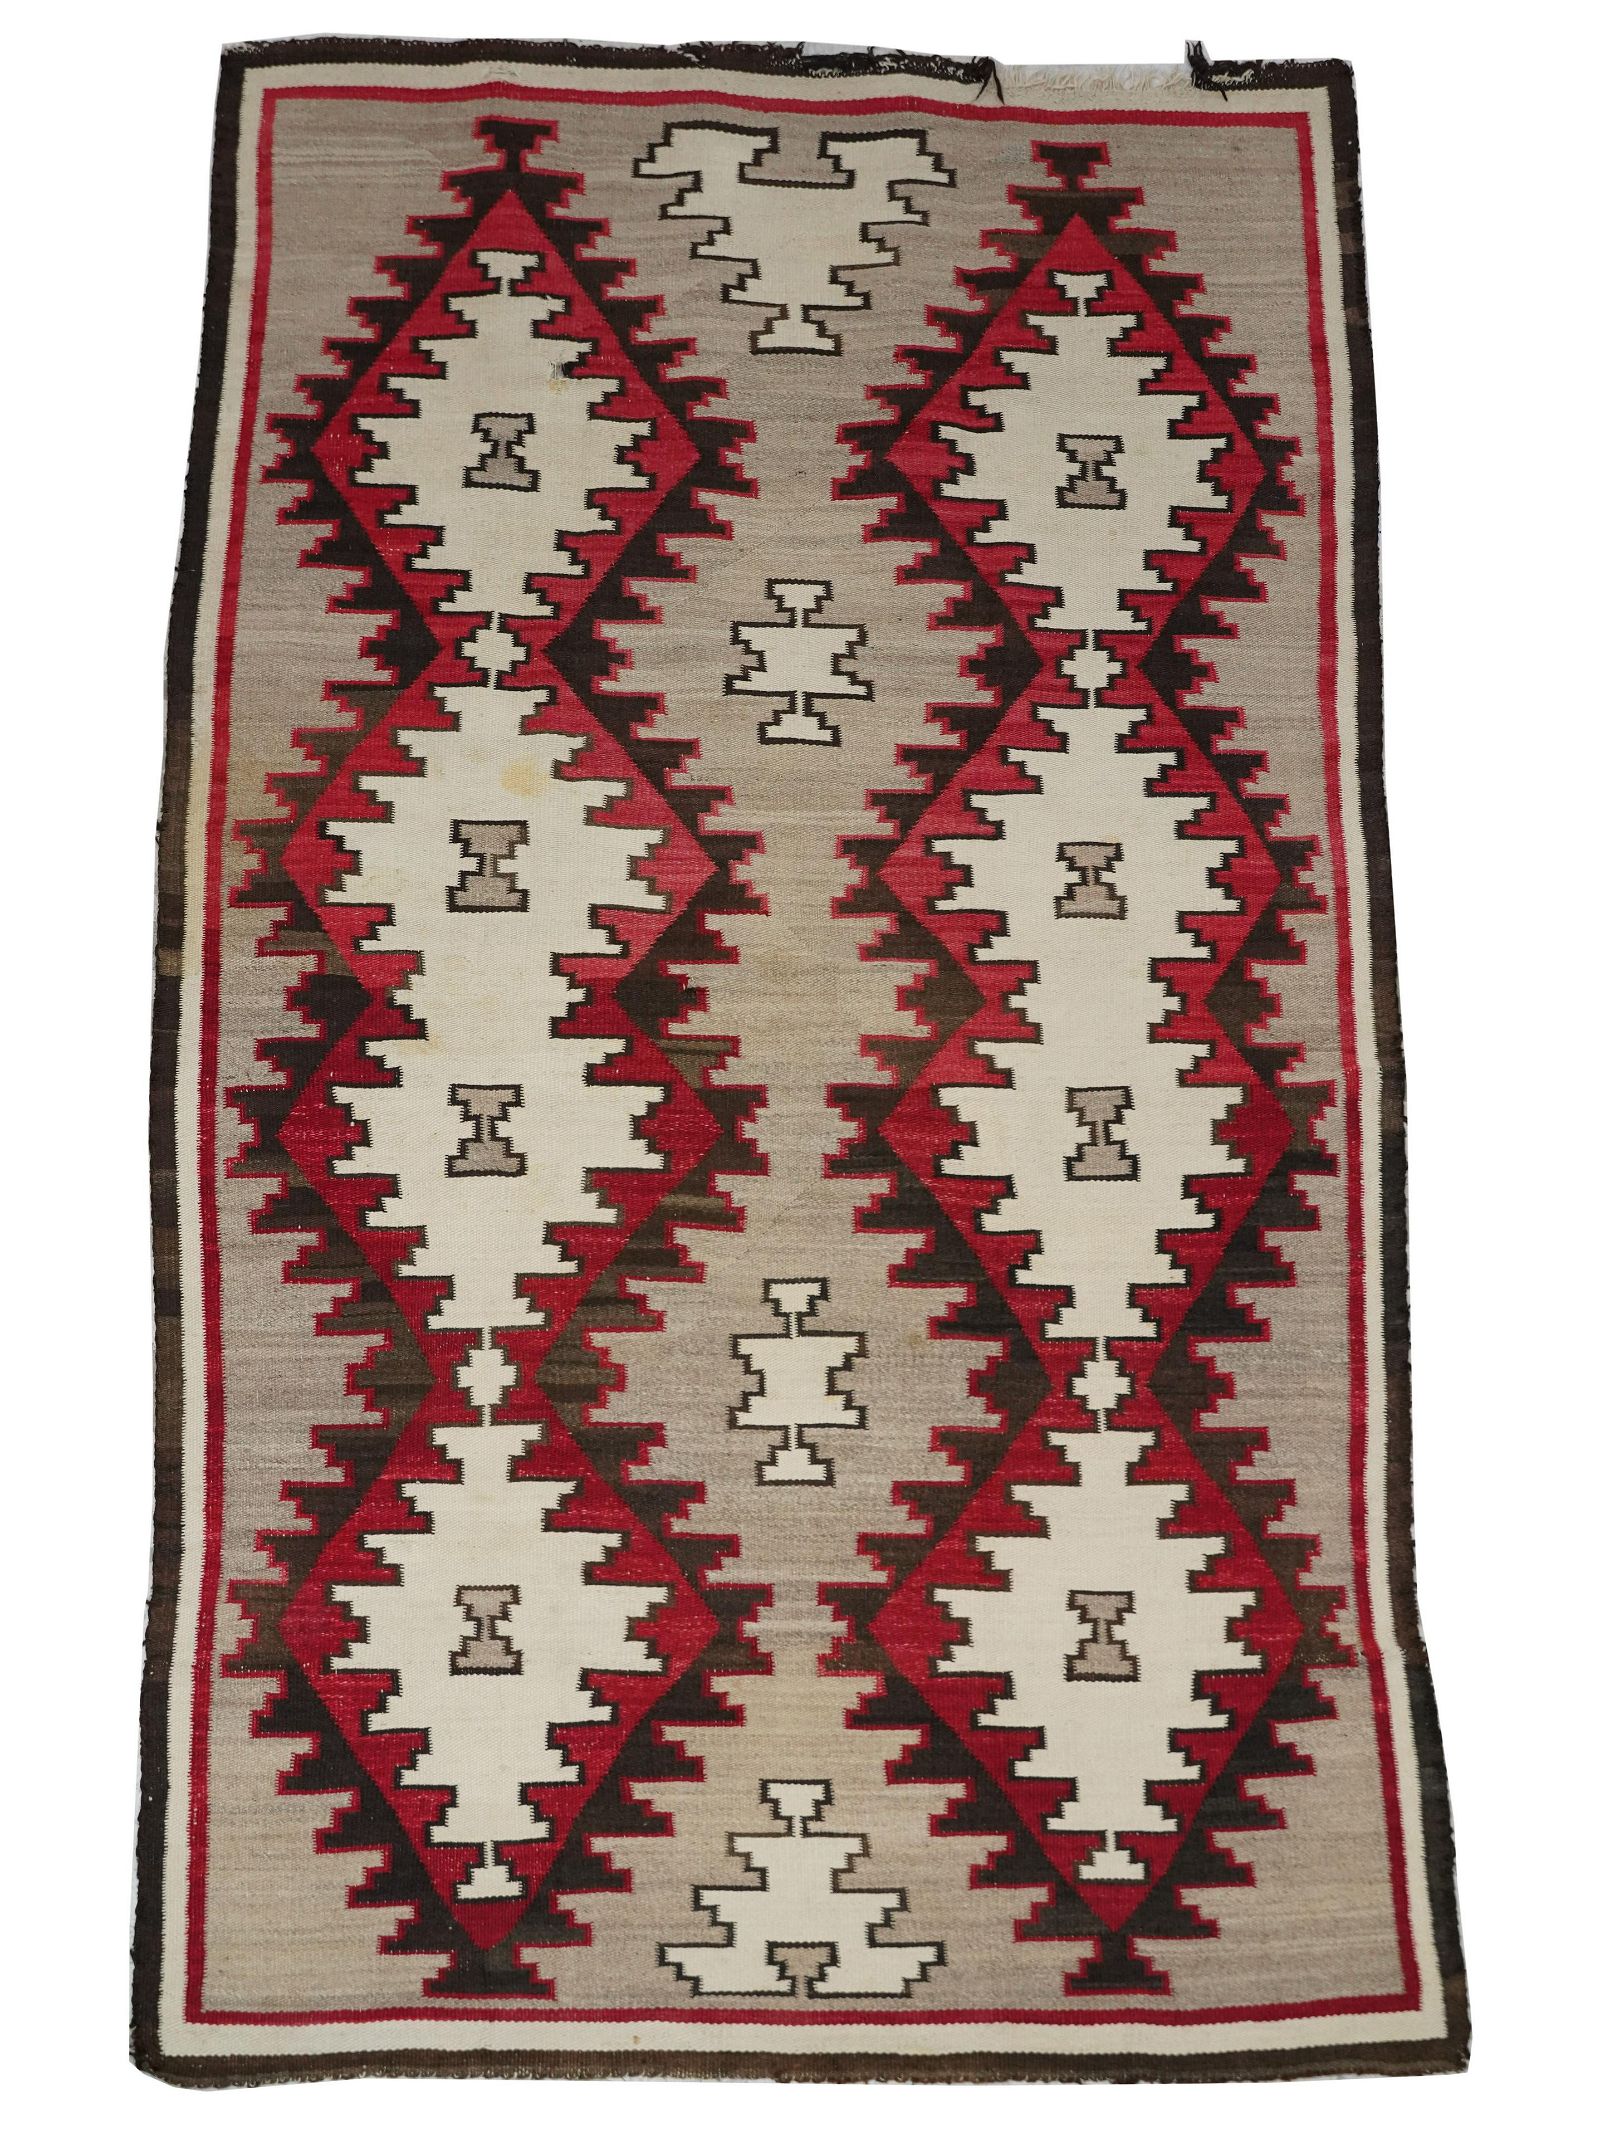 NAVAJO BLANKETwool; woven in red, brown,